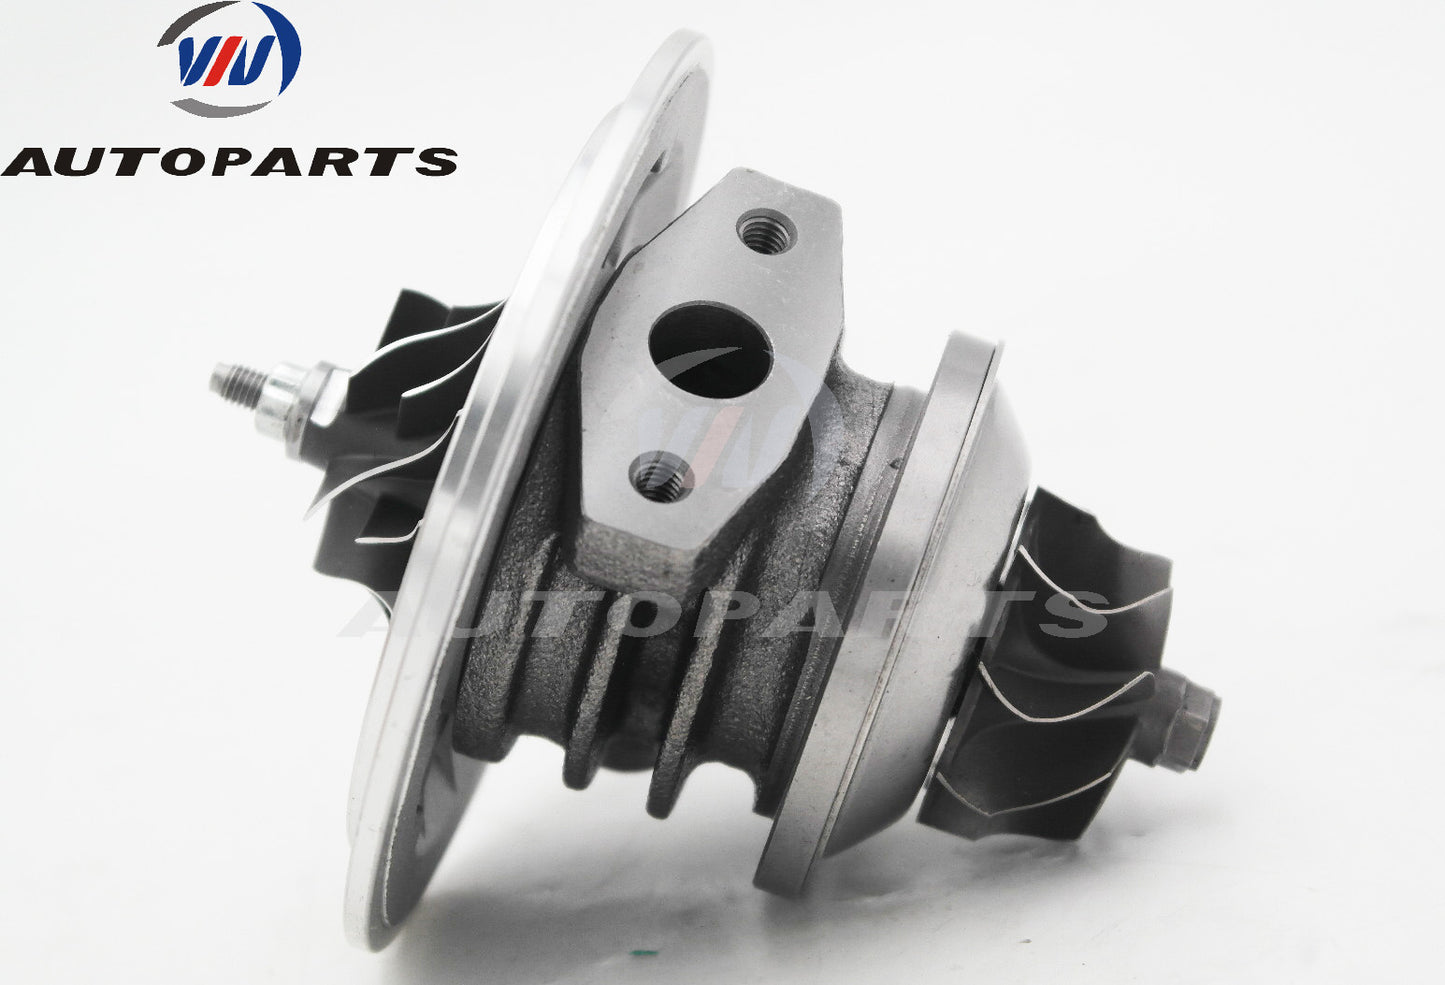 CHRA 5303-710-0515 for Turbocharger 5303-970-0048 for Renault Volvo Mitsubishi Opel 1.9L Diesel Engine